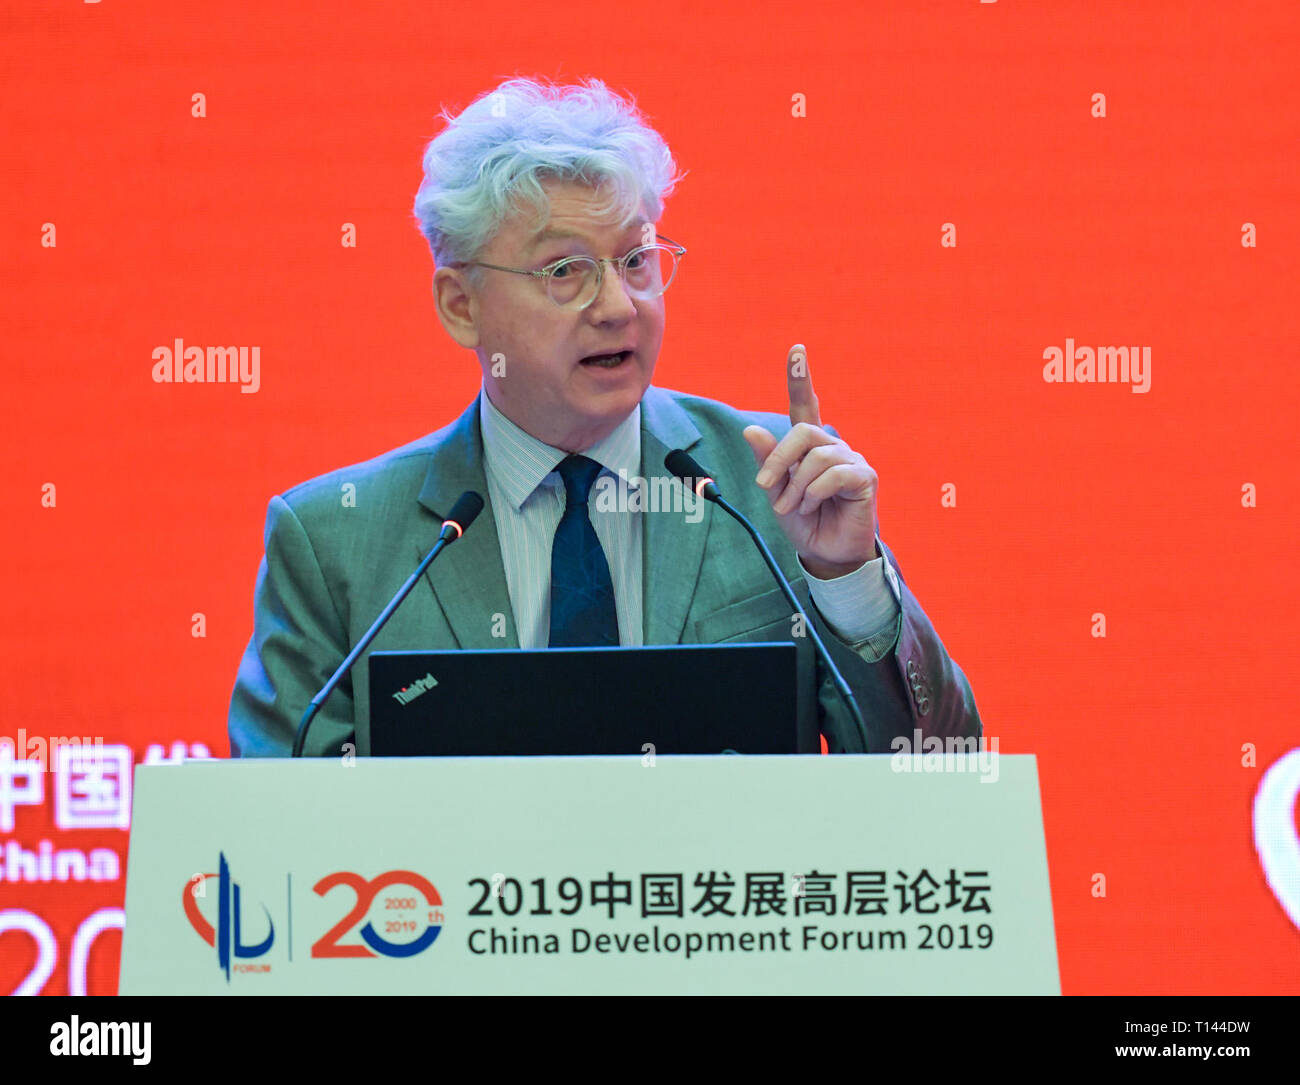 Beijing, China, 23rd march, 2019. (190323) -- BEIJING, March 23, 2019 (Xinhua) -- Oscar-winning director Malcolm Clarke speaks at the Economic Summit of China Development Forum 2019 in Beijing, capital of China, March 23, 2019. The three-day China Development Forum, which kicked off Saturday, will focus on key issues such as the supply-side structural reform, new measures of proactive fiscal policy, and the opening-up of the financial sector and financial stability. Credit: Xinhua/Alamy Live News Stock Photo